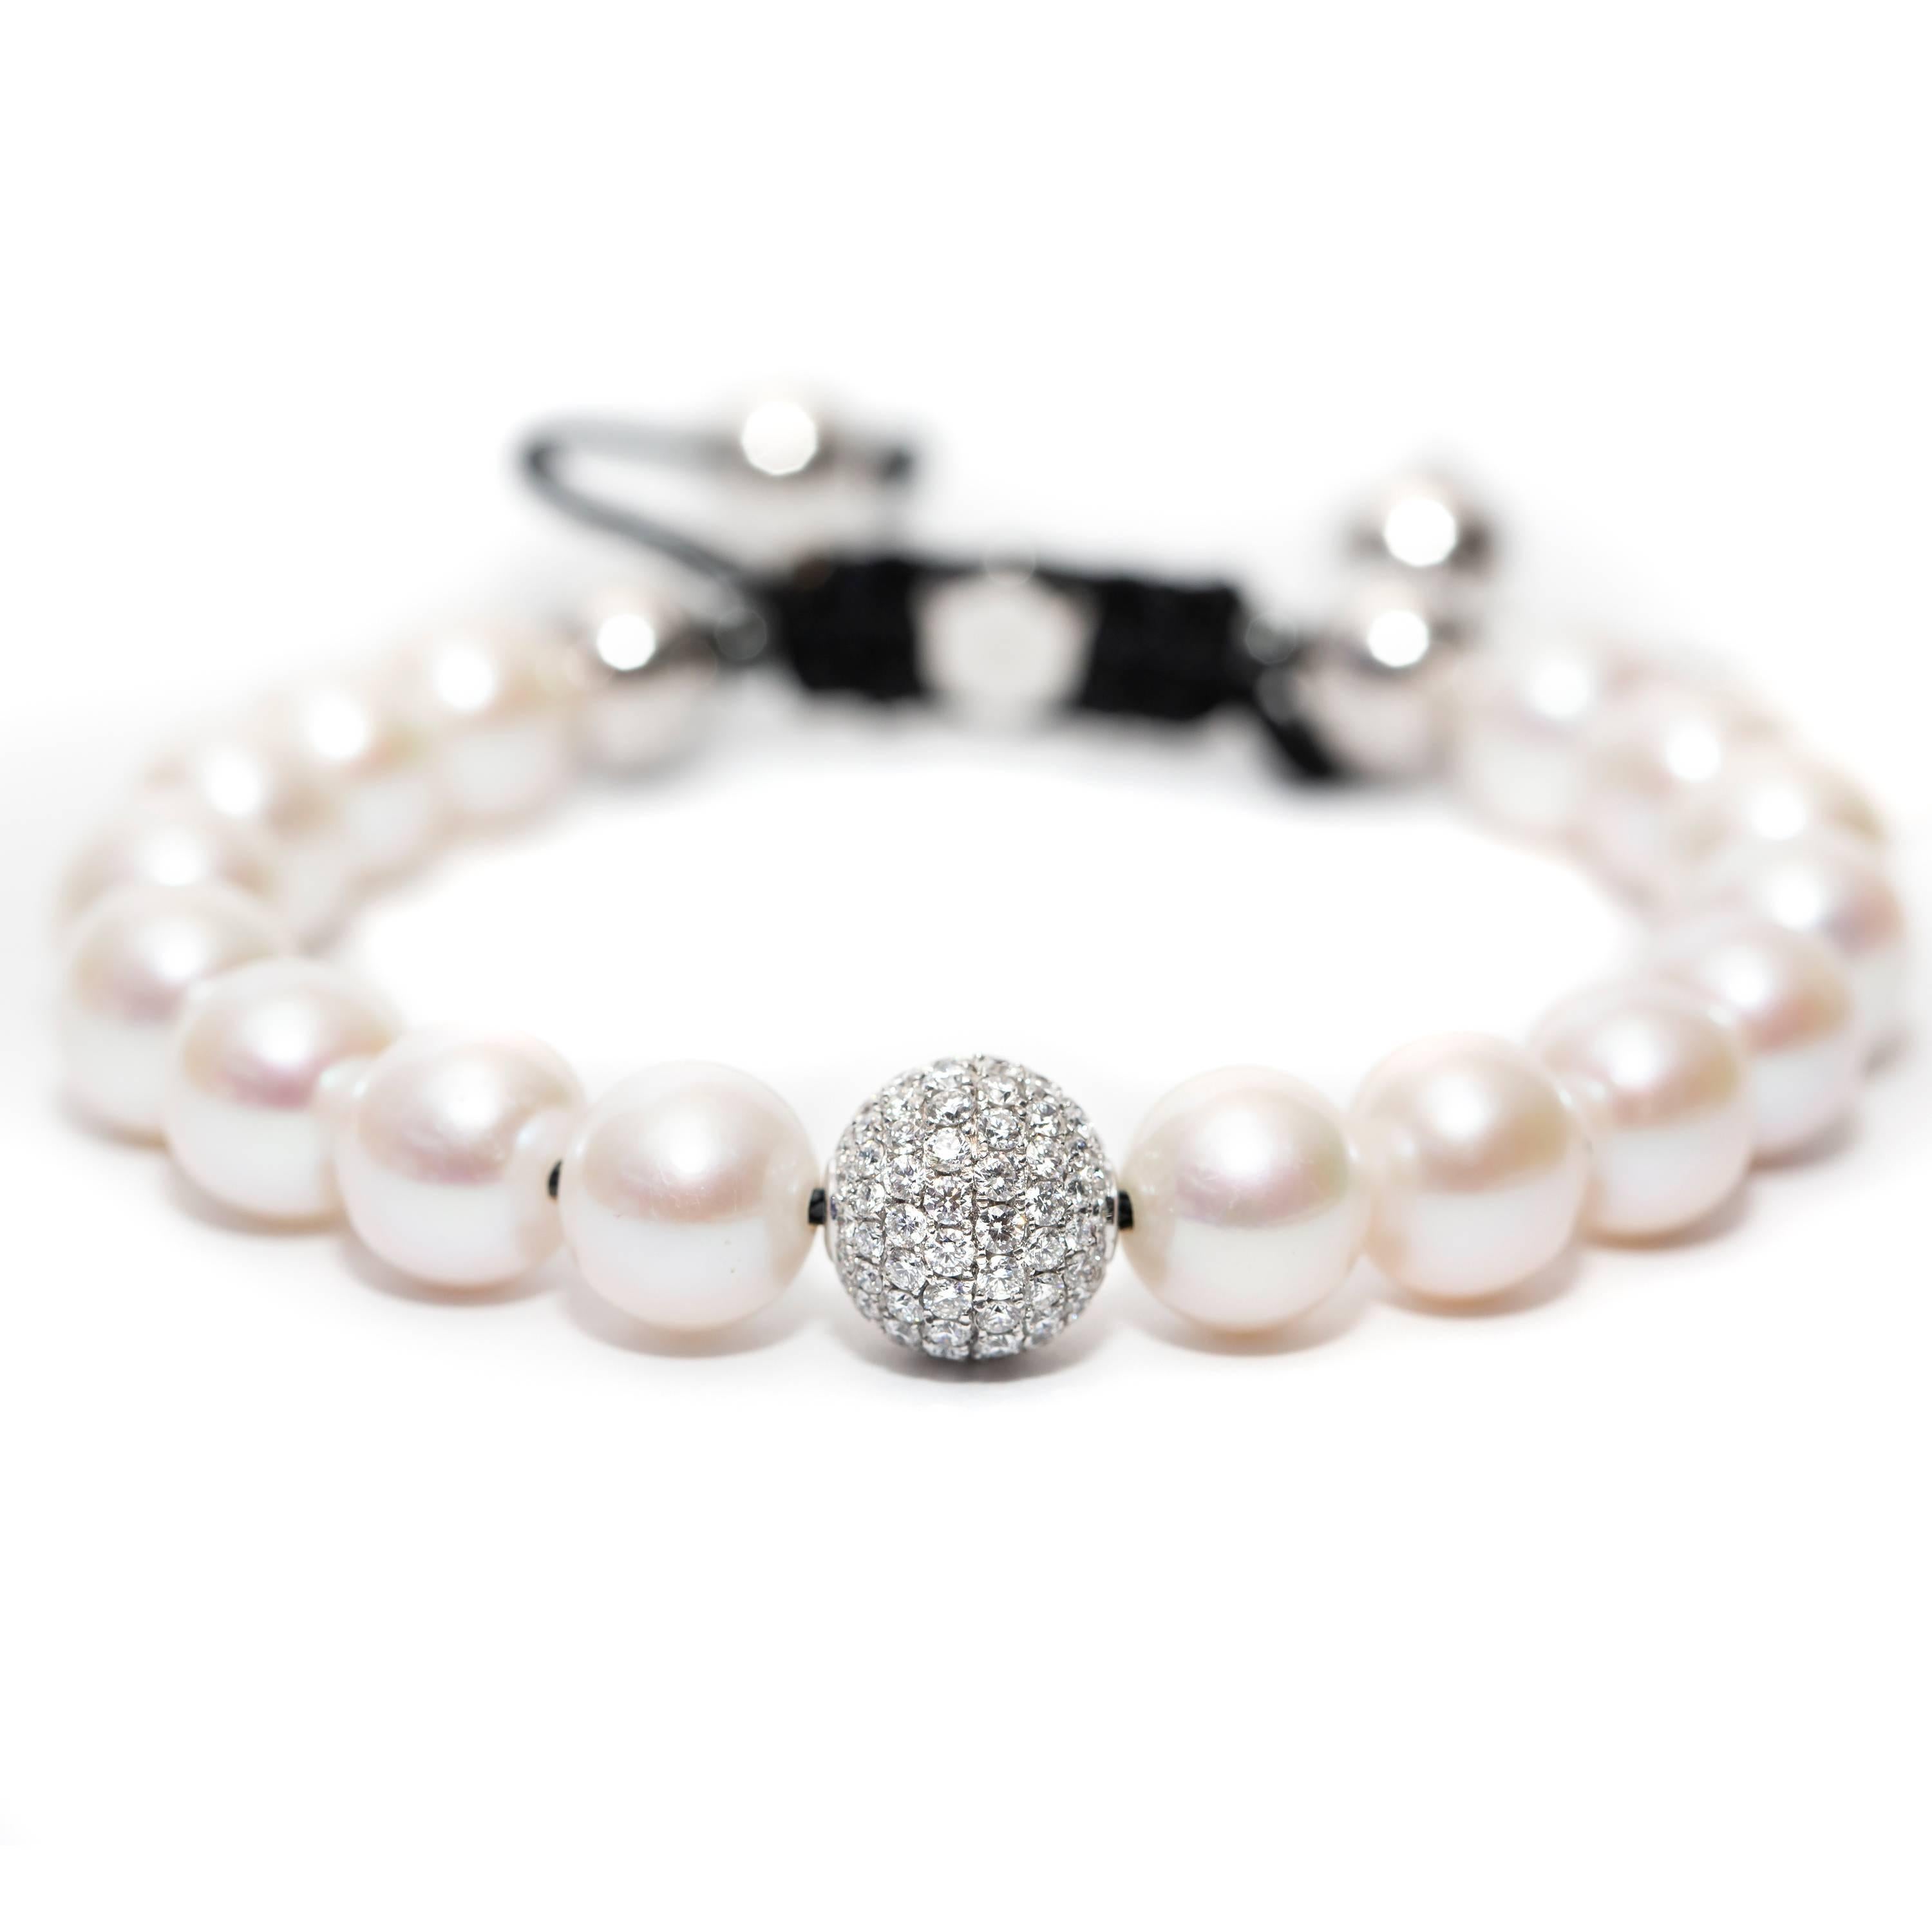 This Contemporary fresh water Pearl Bracelet features an adjustable Cord further highlighted with a Pave set 1.80 Carat Round Brilliant Color G Clarity VS Diamond sphere set in 18 Karat White Gold for a luxurious feel. Available in a choice of